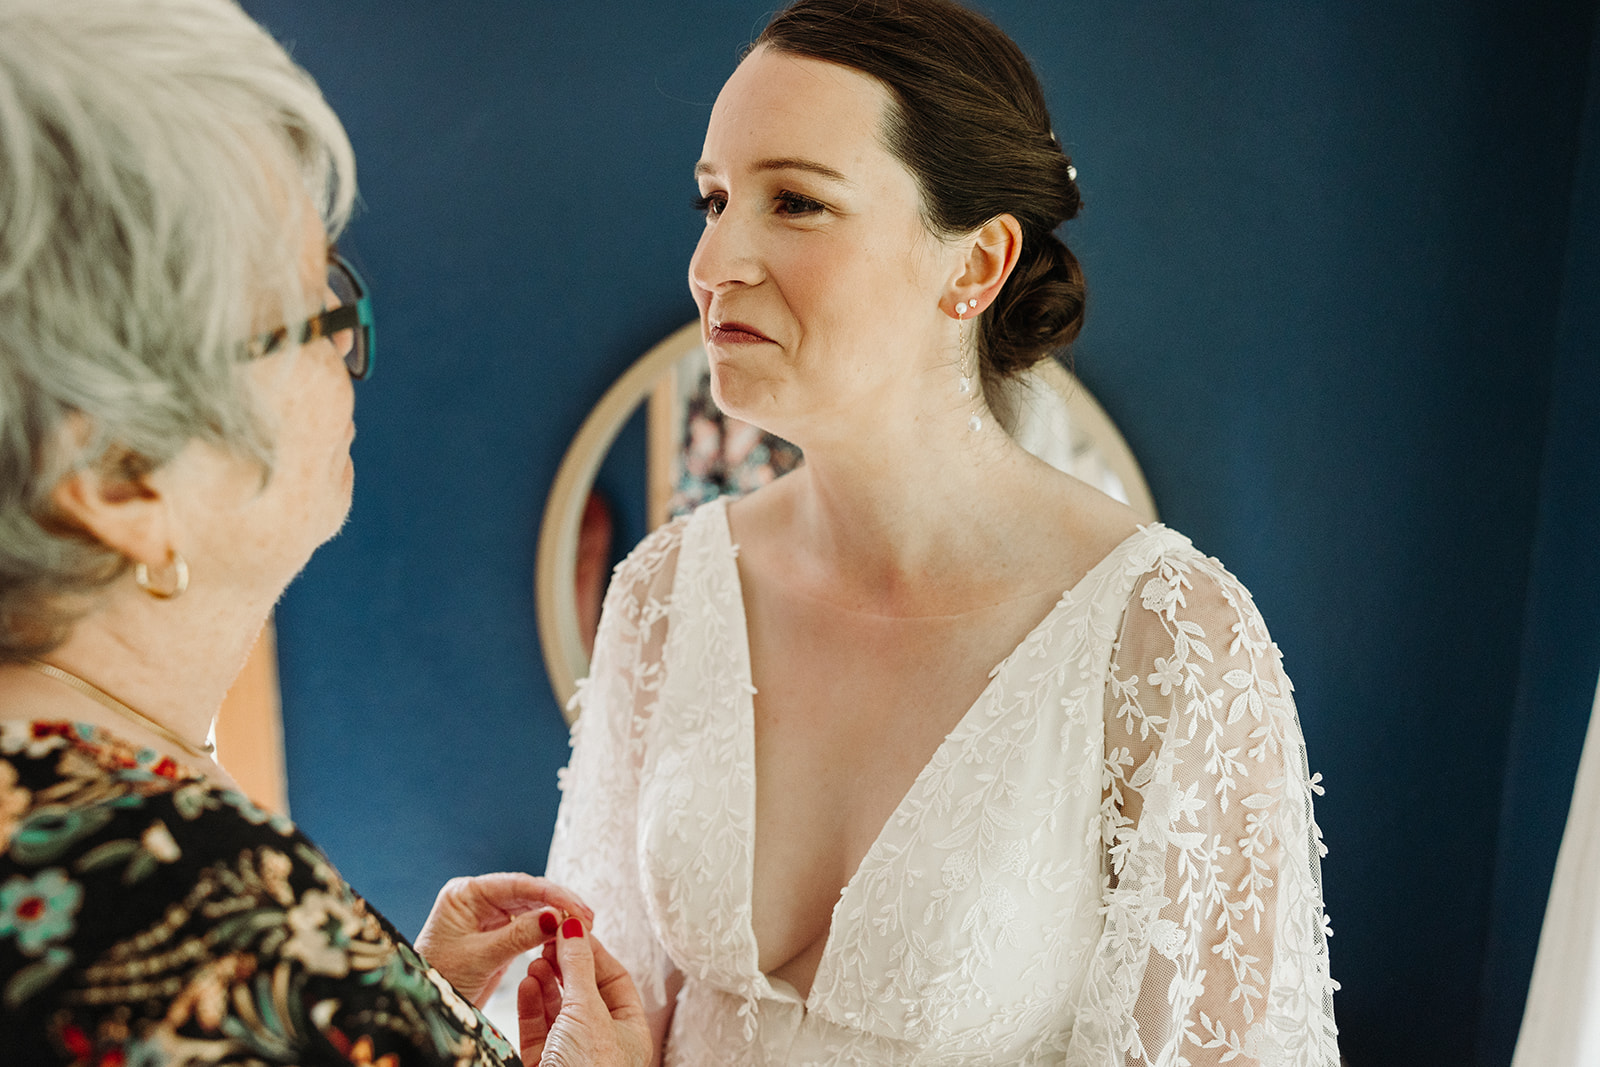 The bride and her mom having a sweet moment, holding hands as they sweetly frown, trying to hold back happy tears.